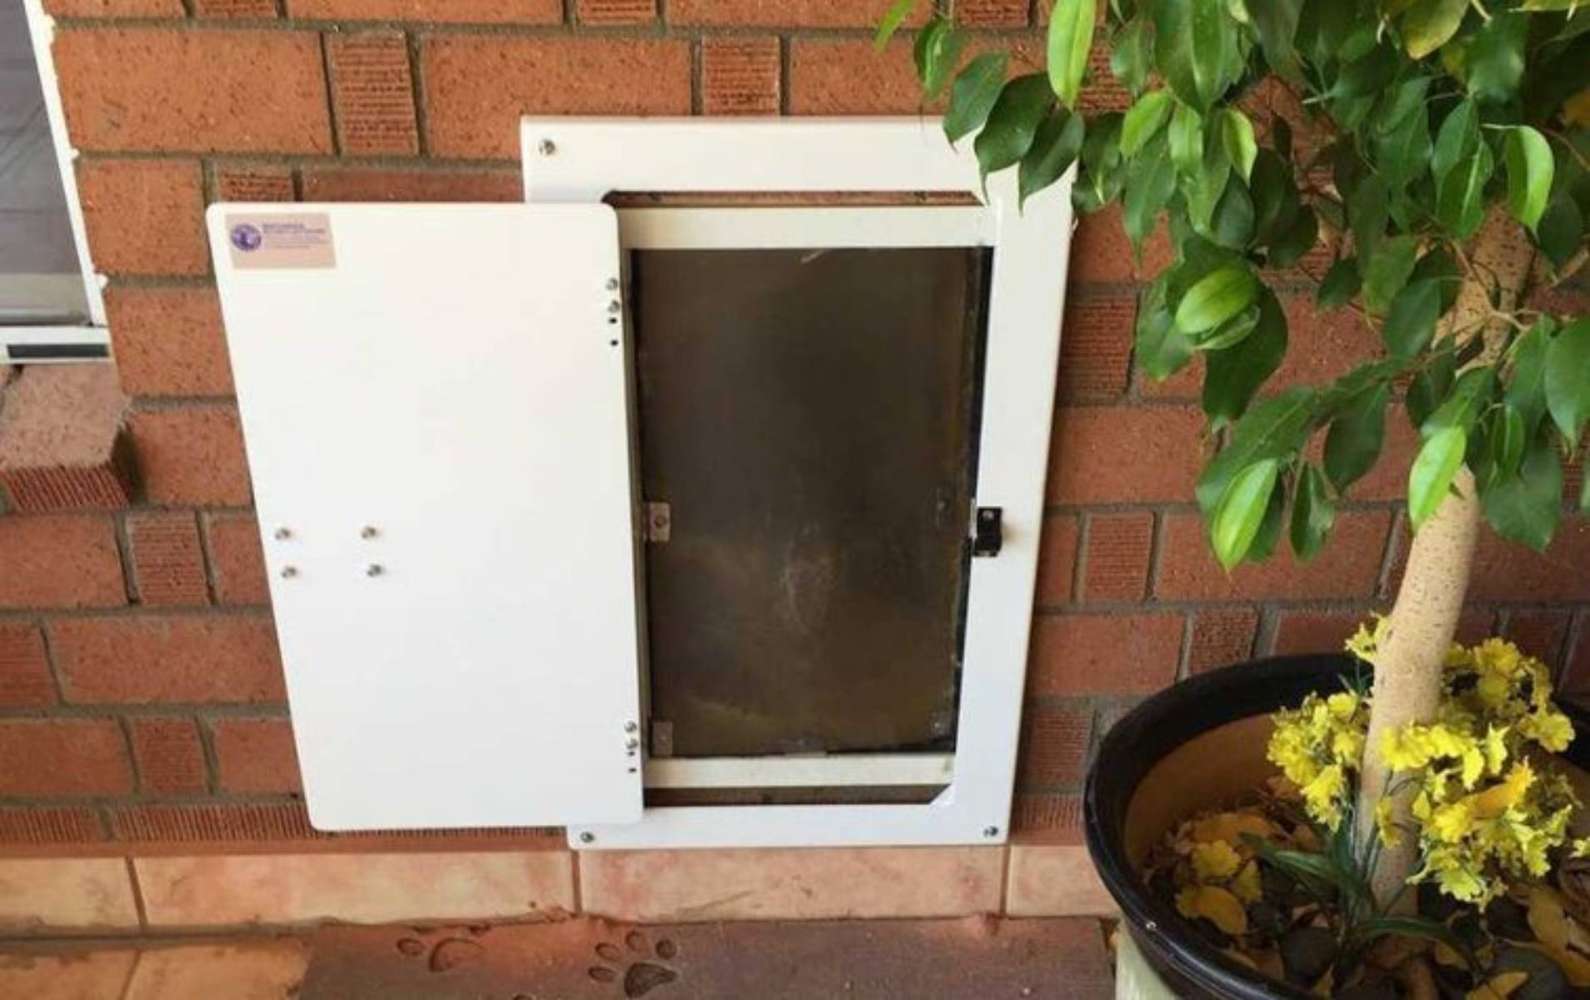 A fully closed Watchdog Security Pet Doors Cover with a black combination lock, installed in a brick wall next to a 'Wipe Your Paws' doormat and a potted plant. What are the best types dog doors for enhanced security